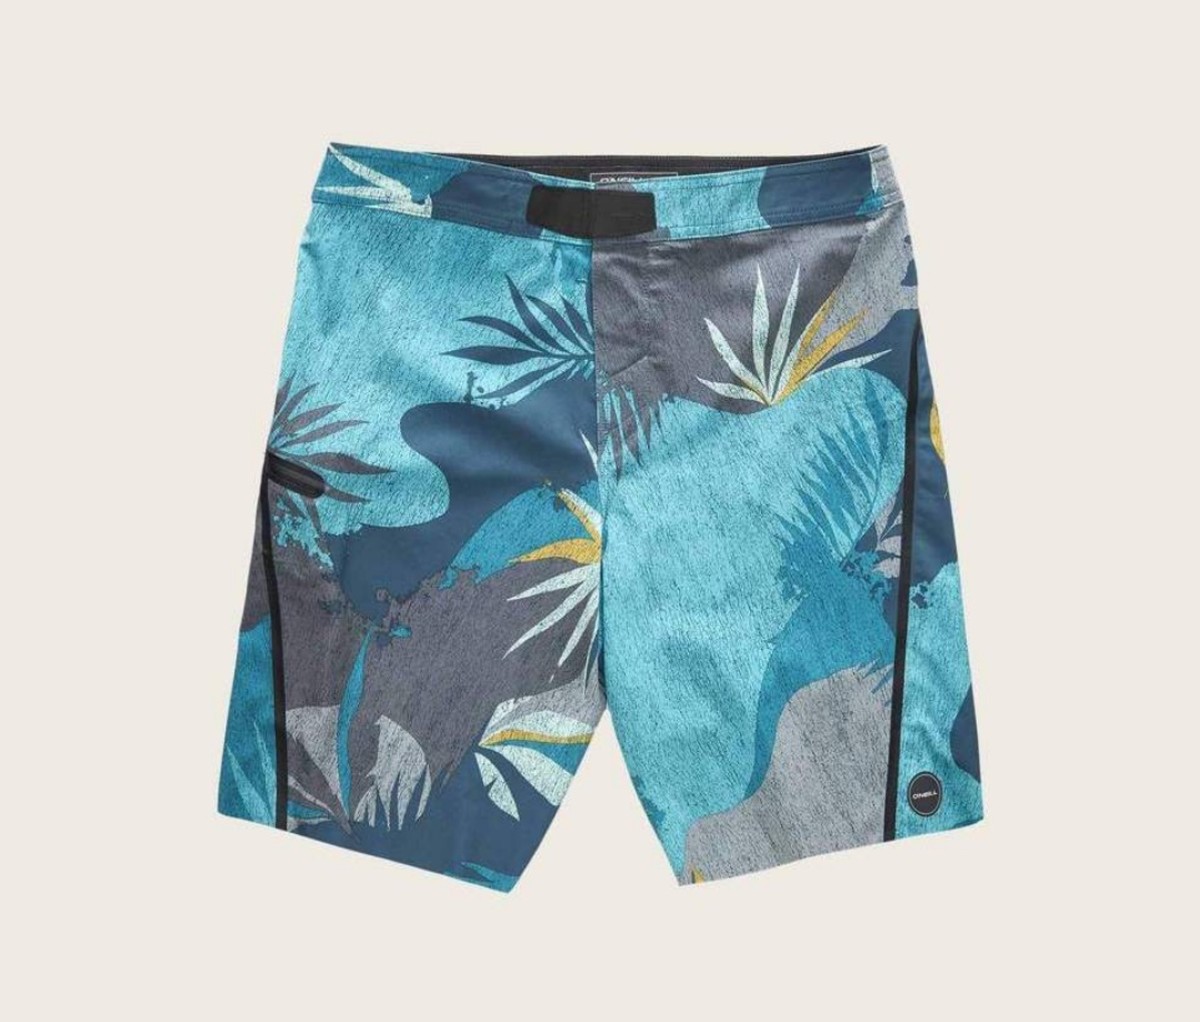 Professional Competition Trunks Men Quick Dry Swimwear Surfing Beach Shorts 462 